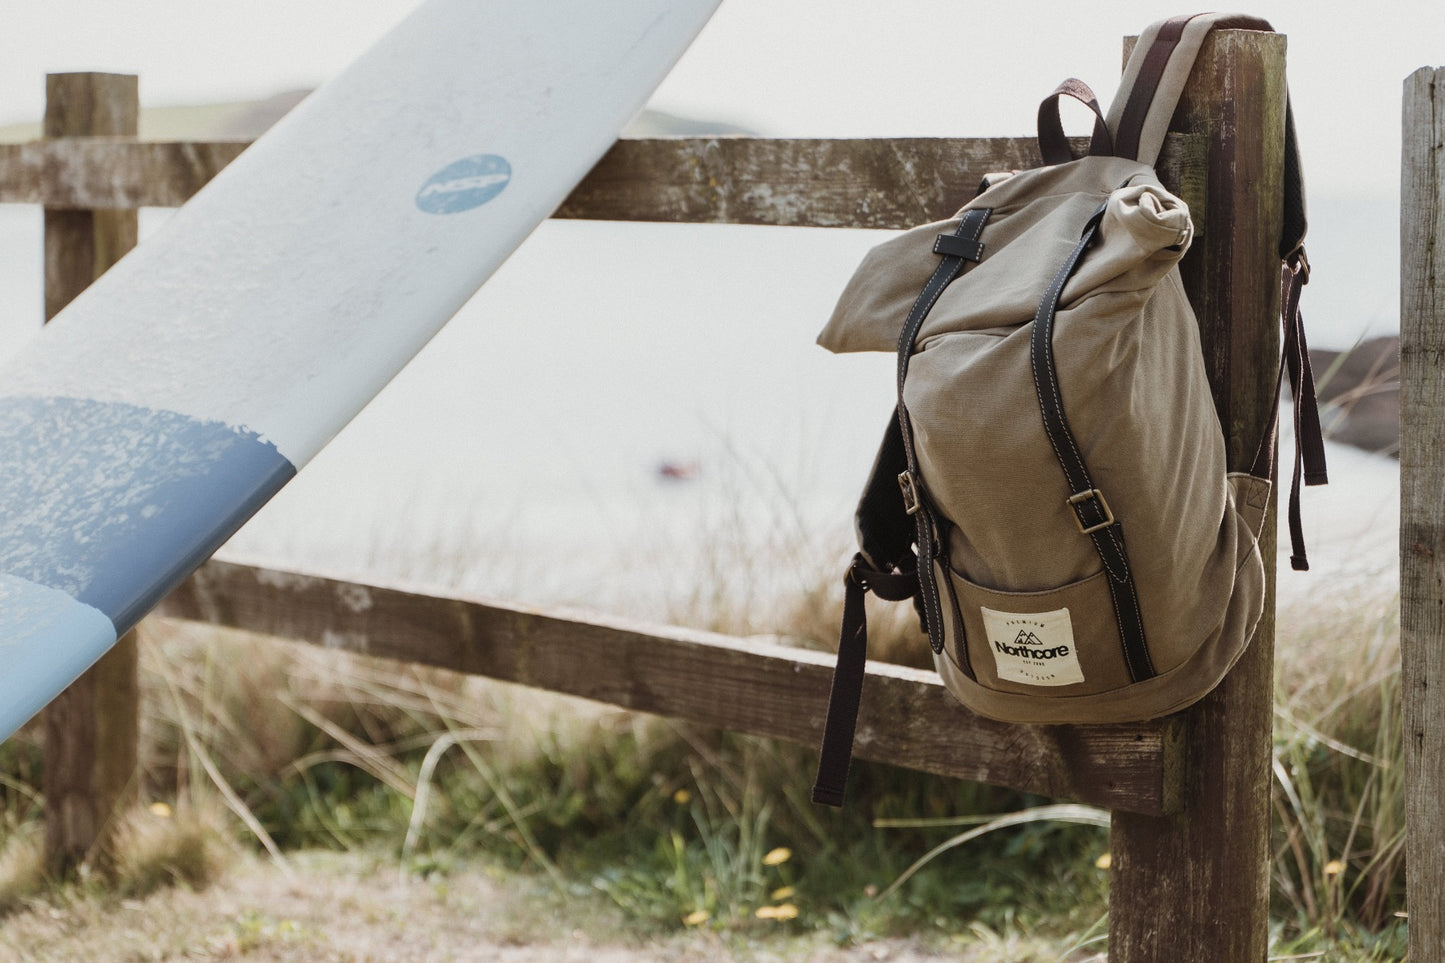 waxed canvas backpack by Northcore